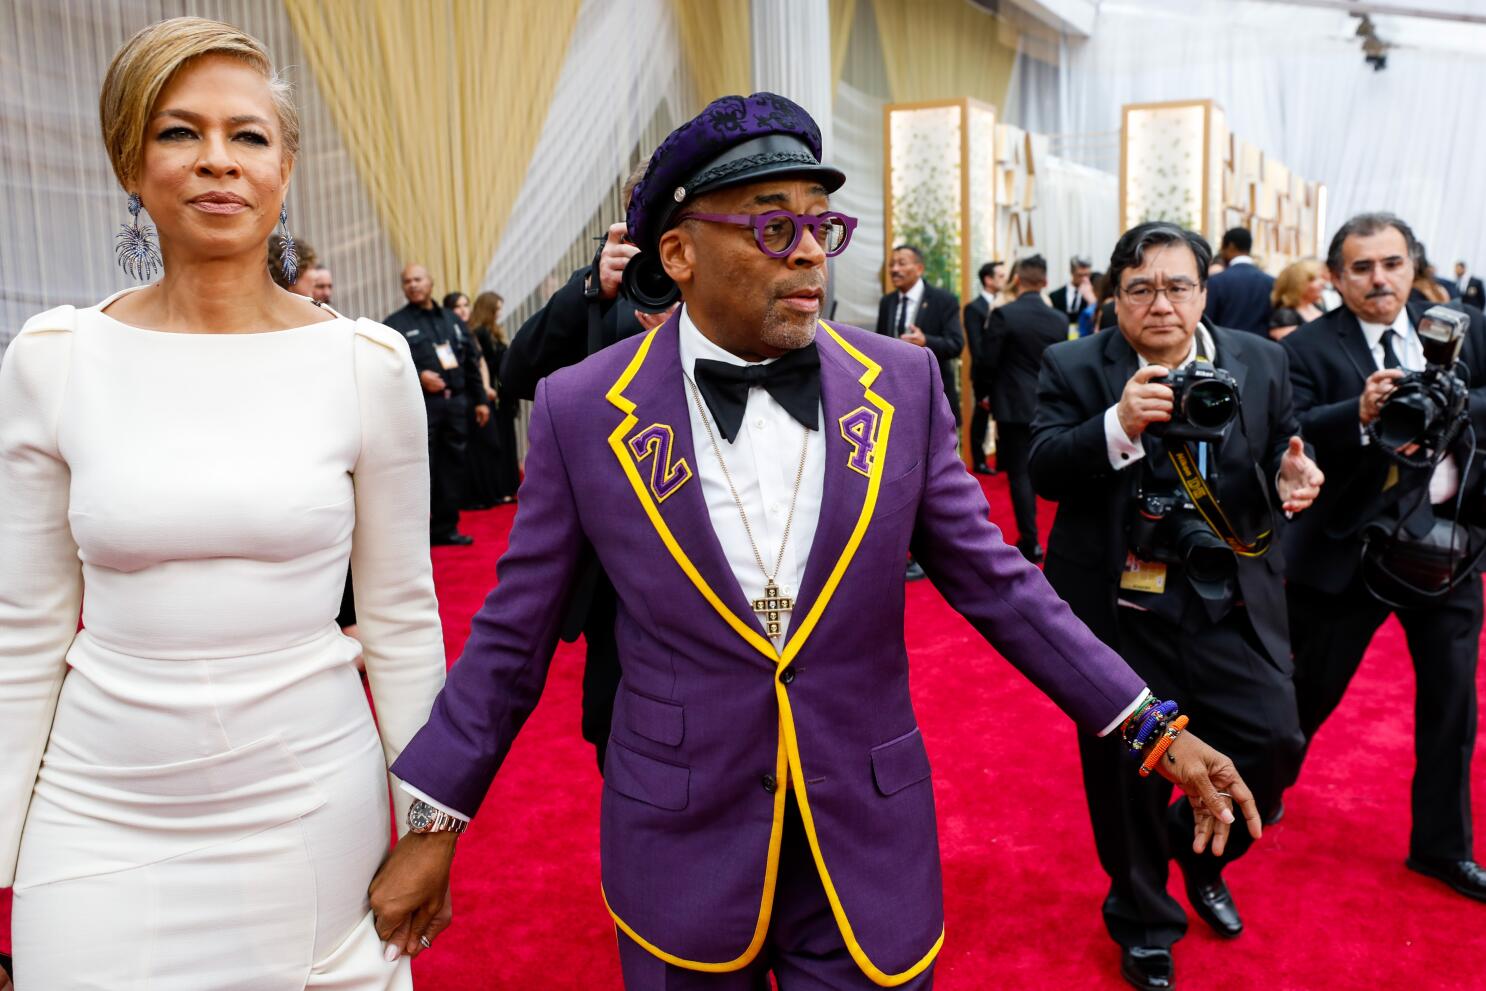 Spike Lee Honors Kobe Bryant With “24” Lakers Tux at 2020 Oscars